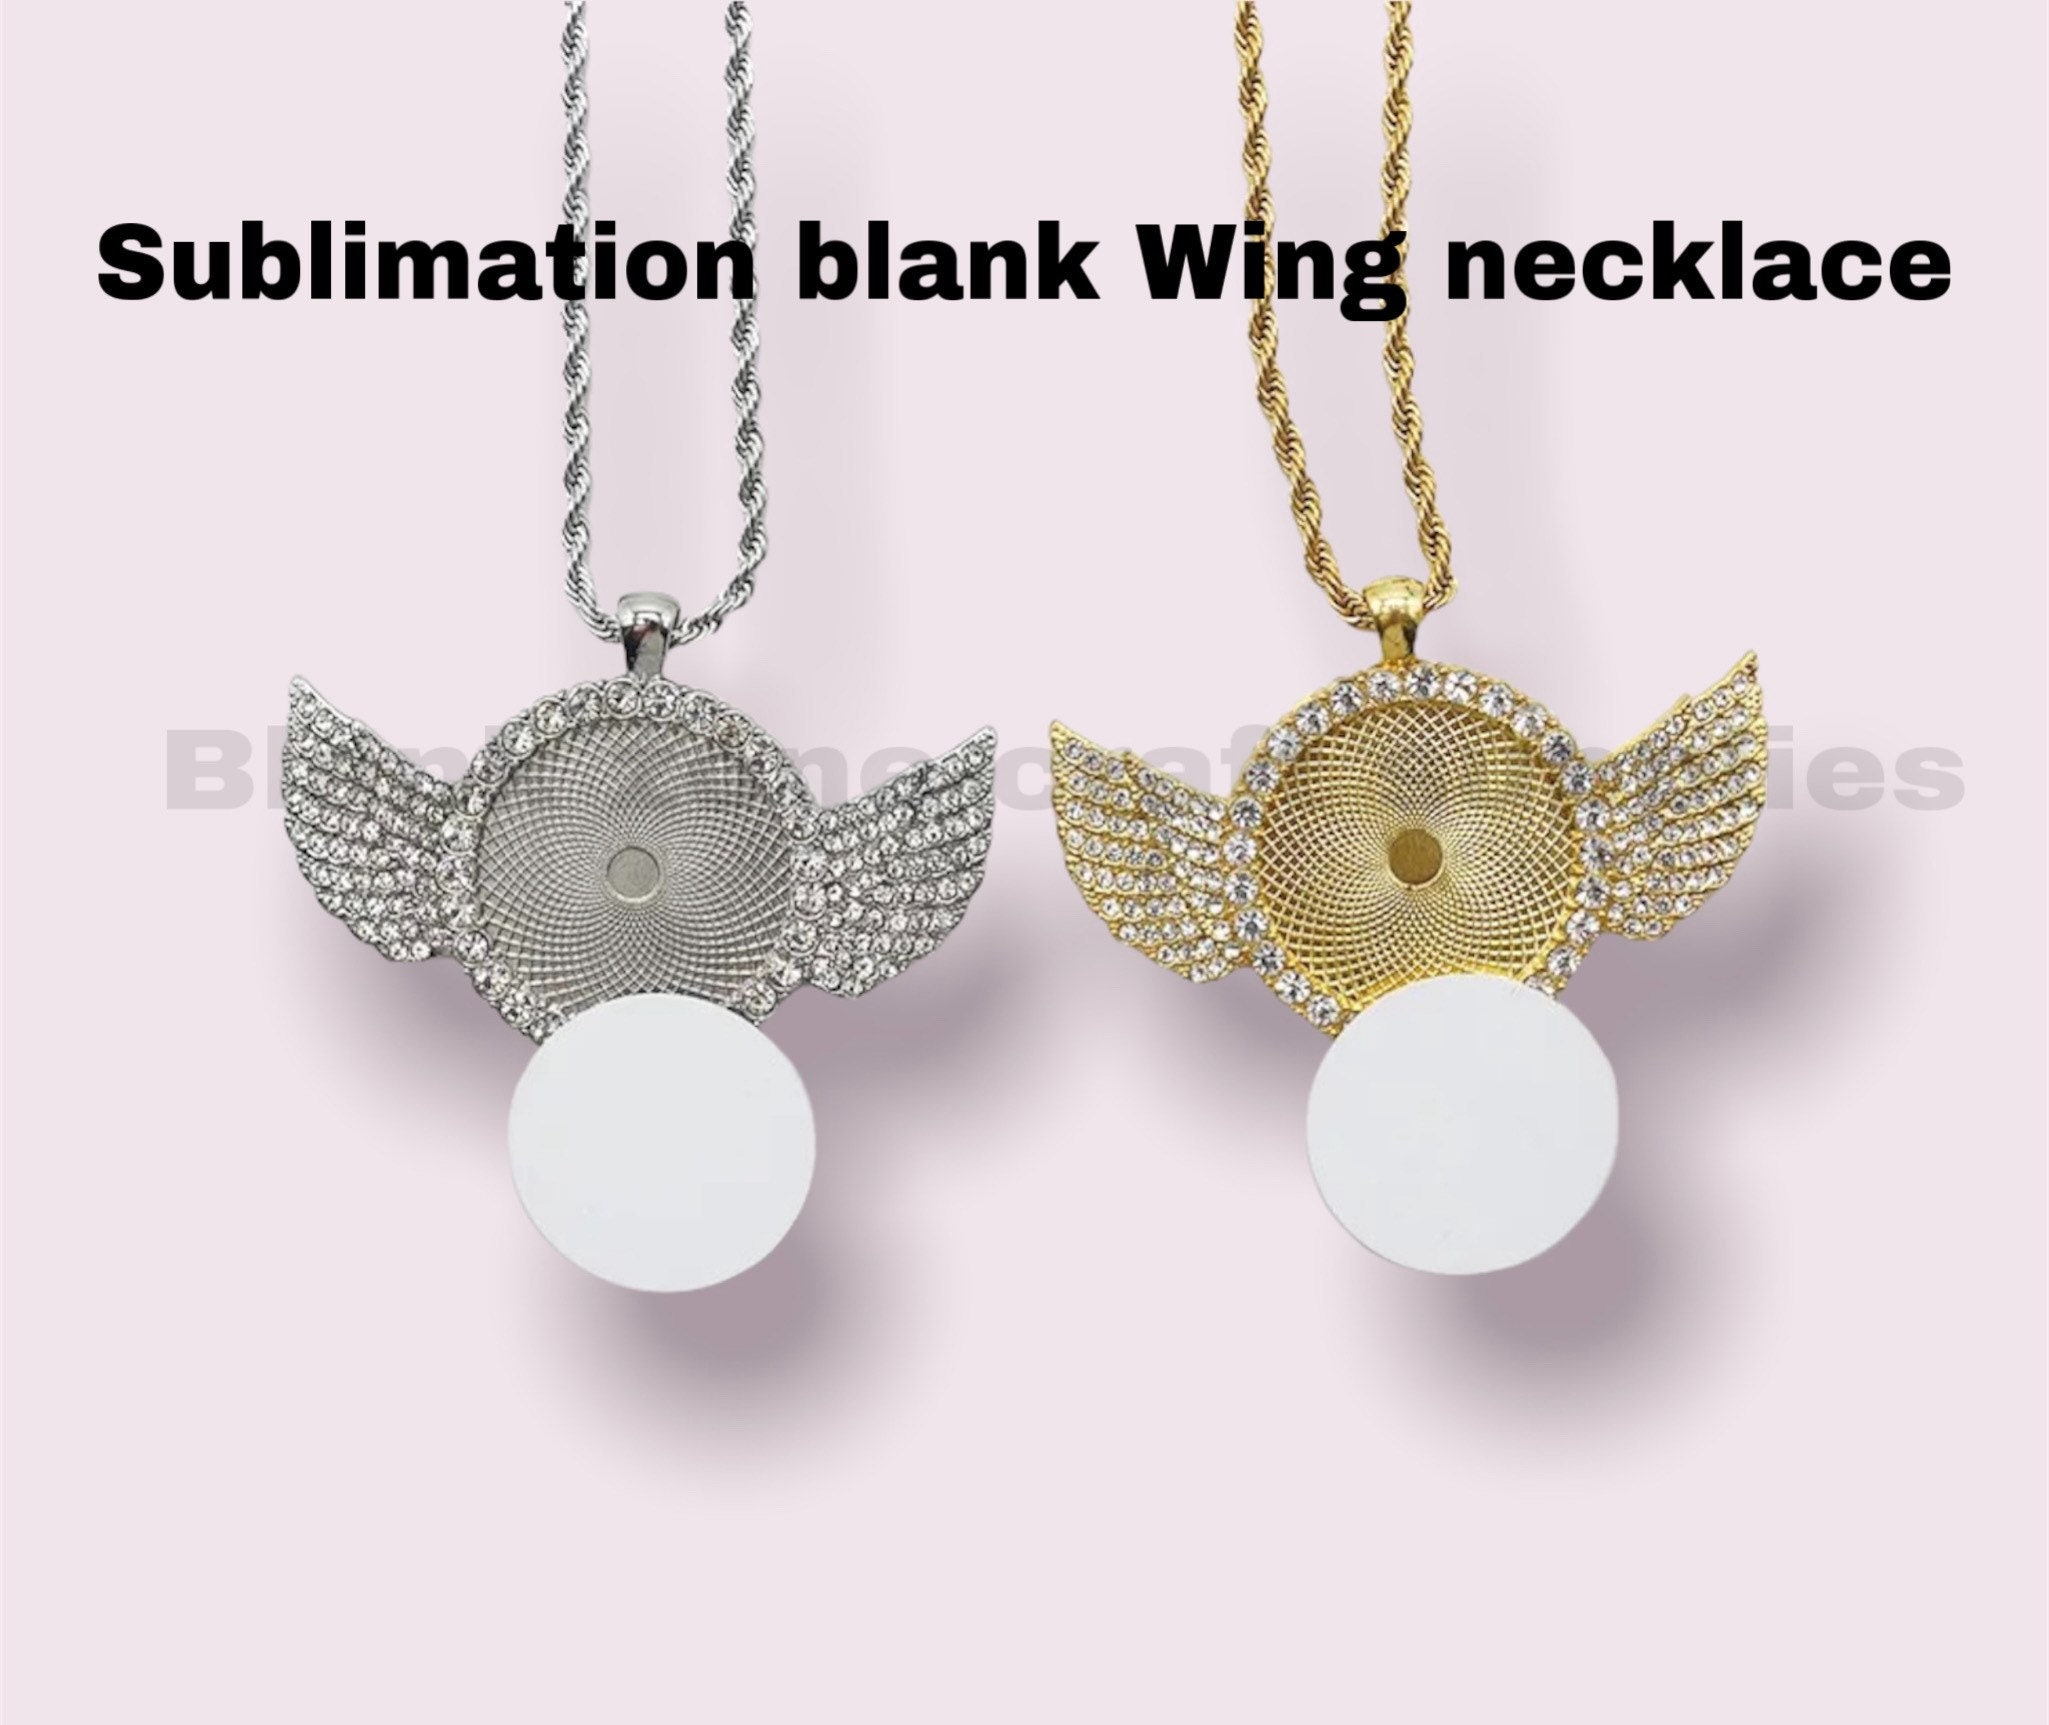 Square Sublimation Necklaces, BEDSIFV 15 Set Sublimation Necklace Blank  With Chain, Includes 15 Pcs Rotatable Double-sided Rhinestone Pendant, 15  Pcs